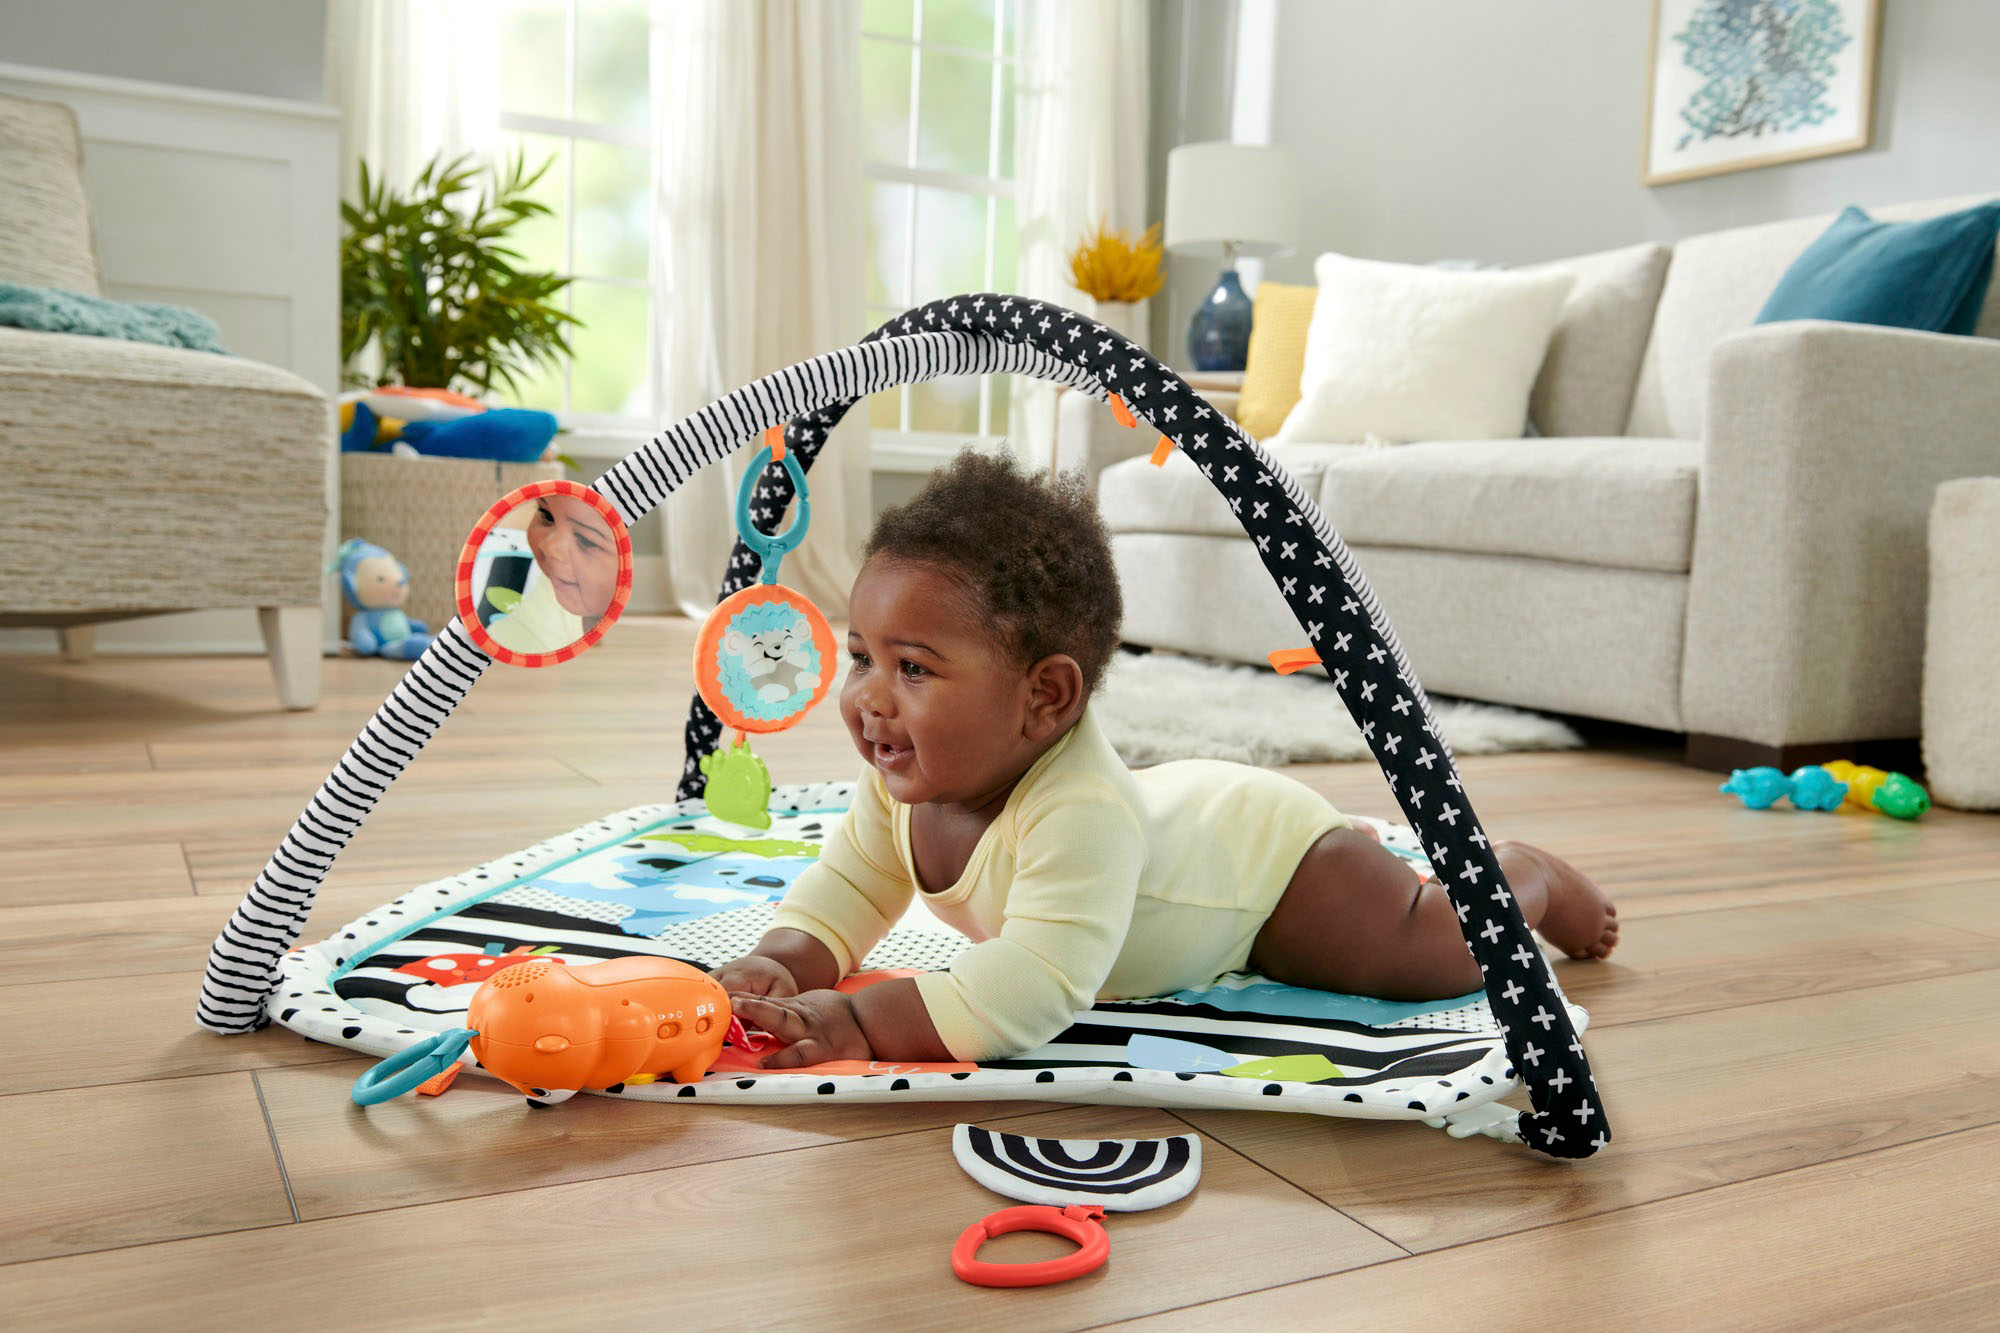 Fisher-Price 3-in-1 Music, Glow and Grow Baby Gym Play-mat Fun